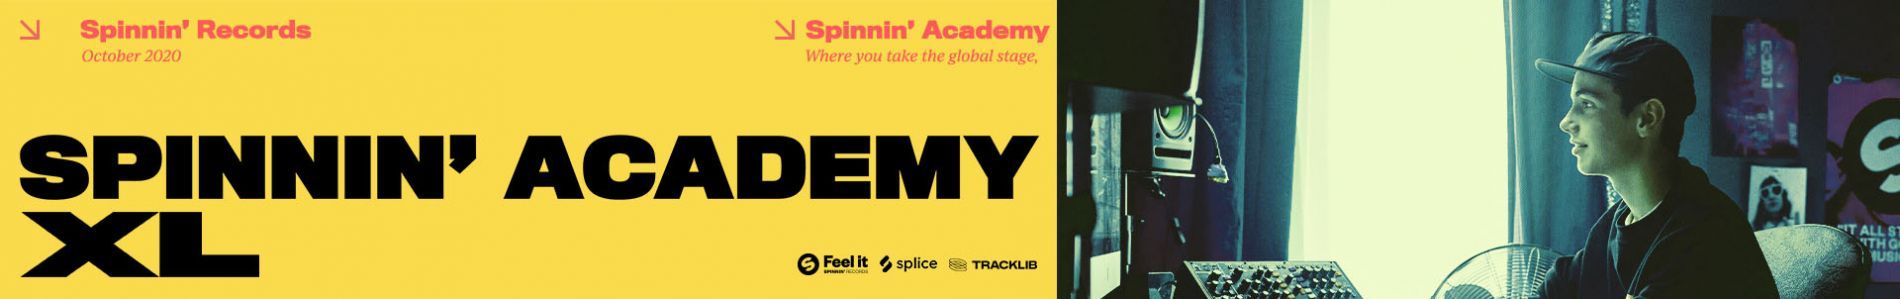 Spinnin' Sessions Academy XL 2020